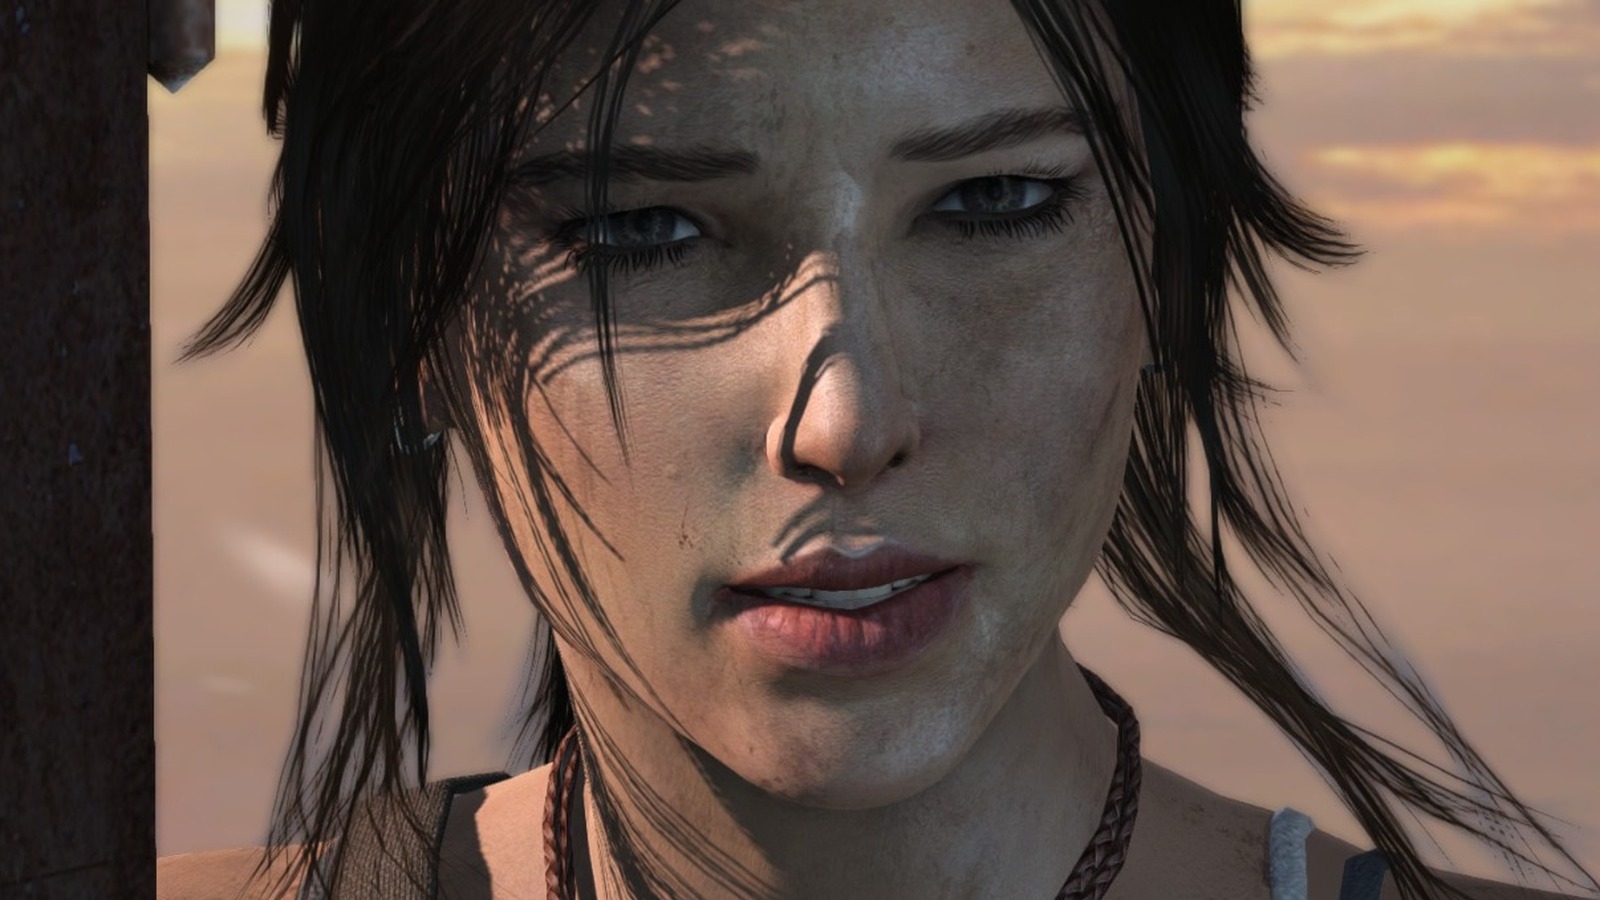 amy starns add laura croft in trouble photo